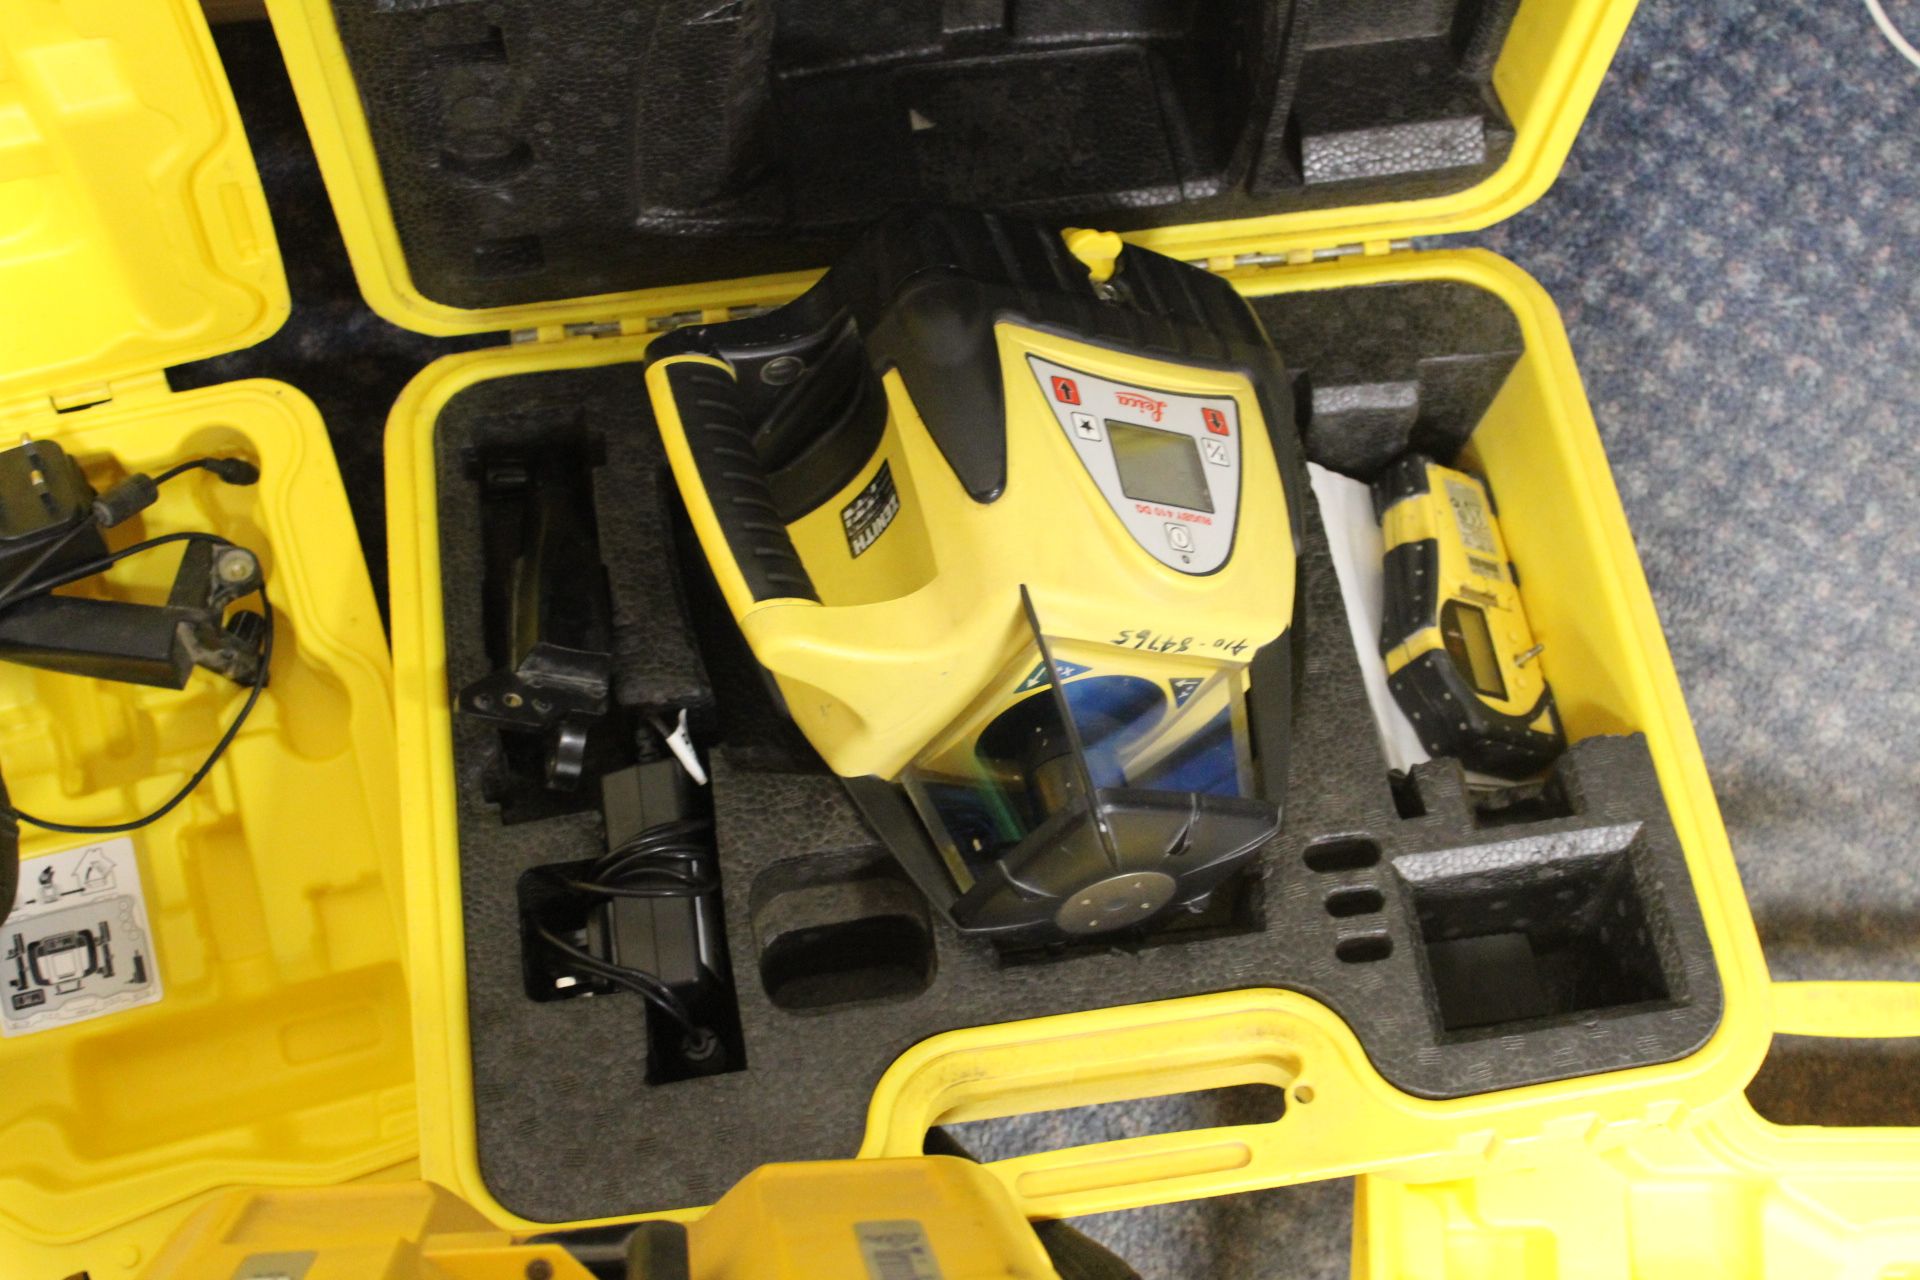 Leica Rugby 410 DG Laser Level, with carry case